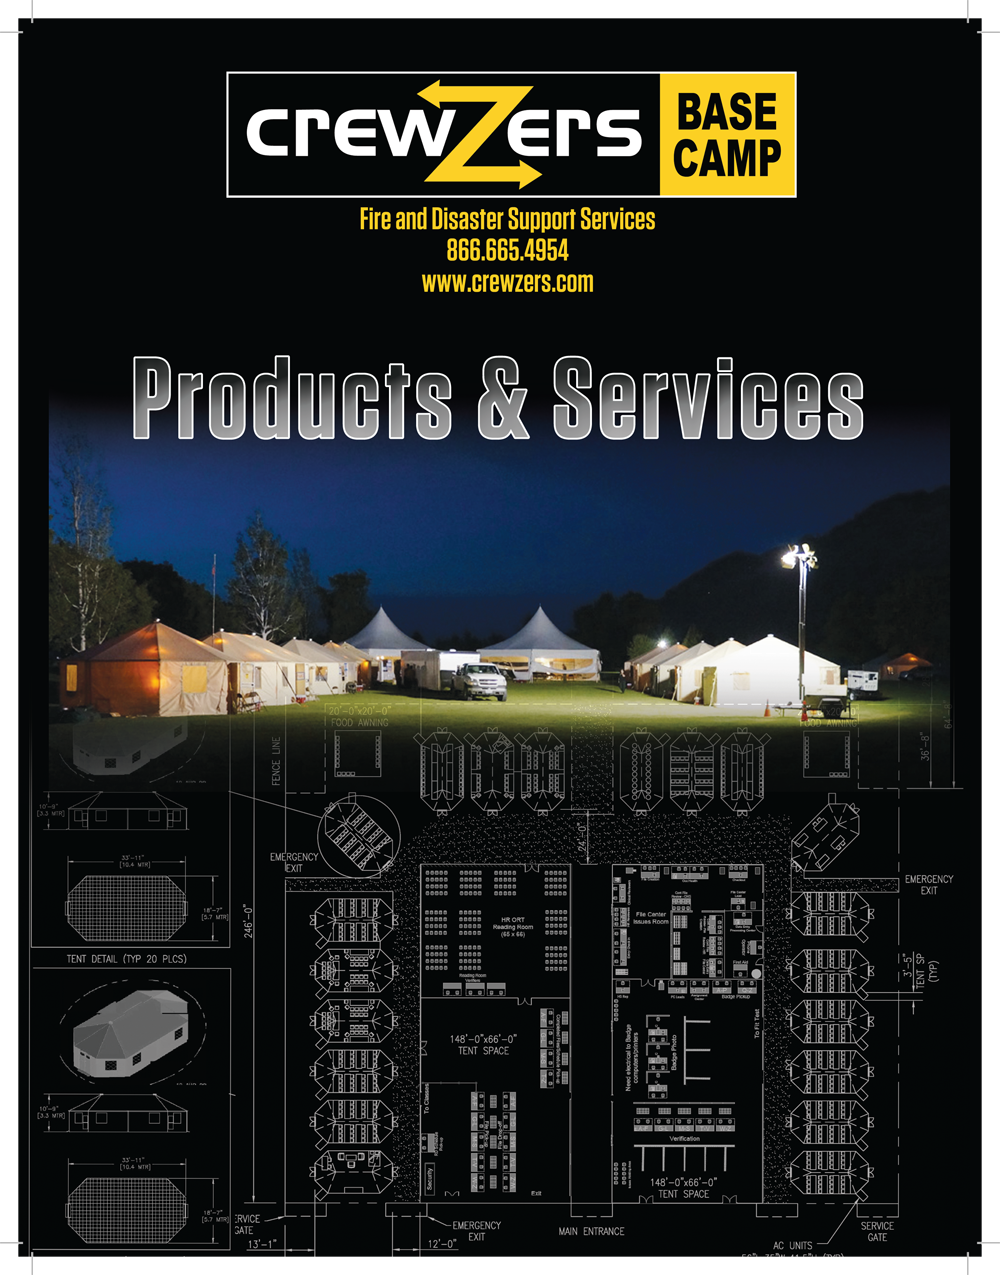 Crewzers Products and Services